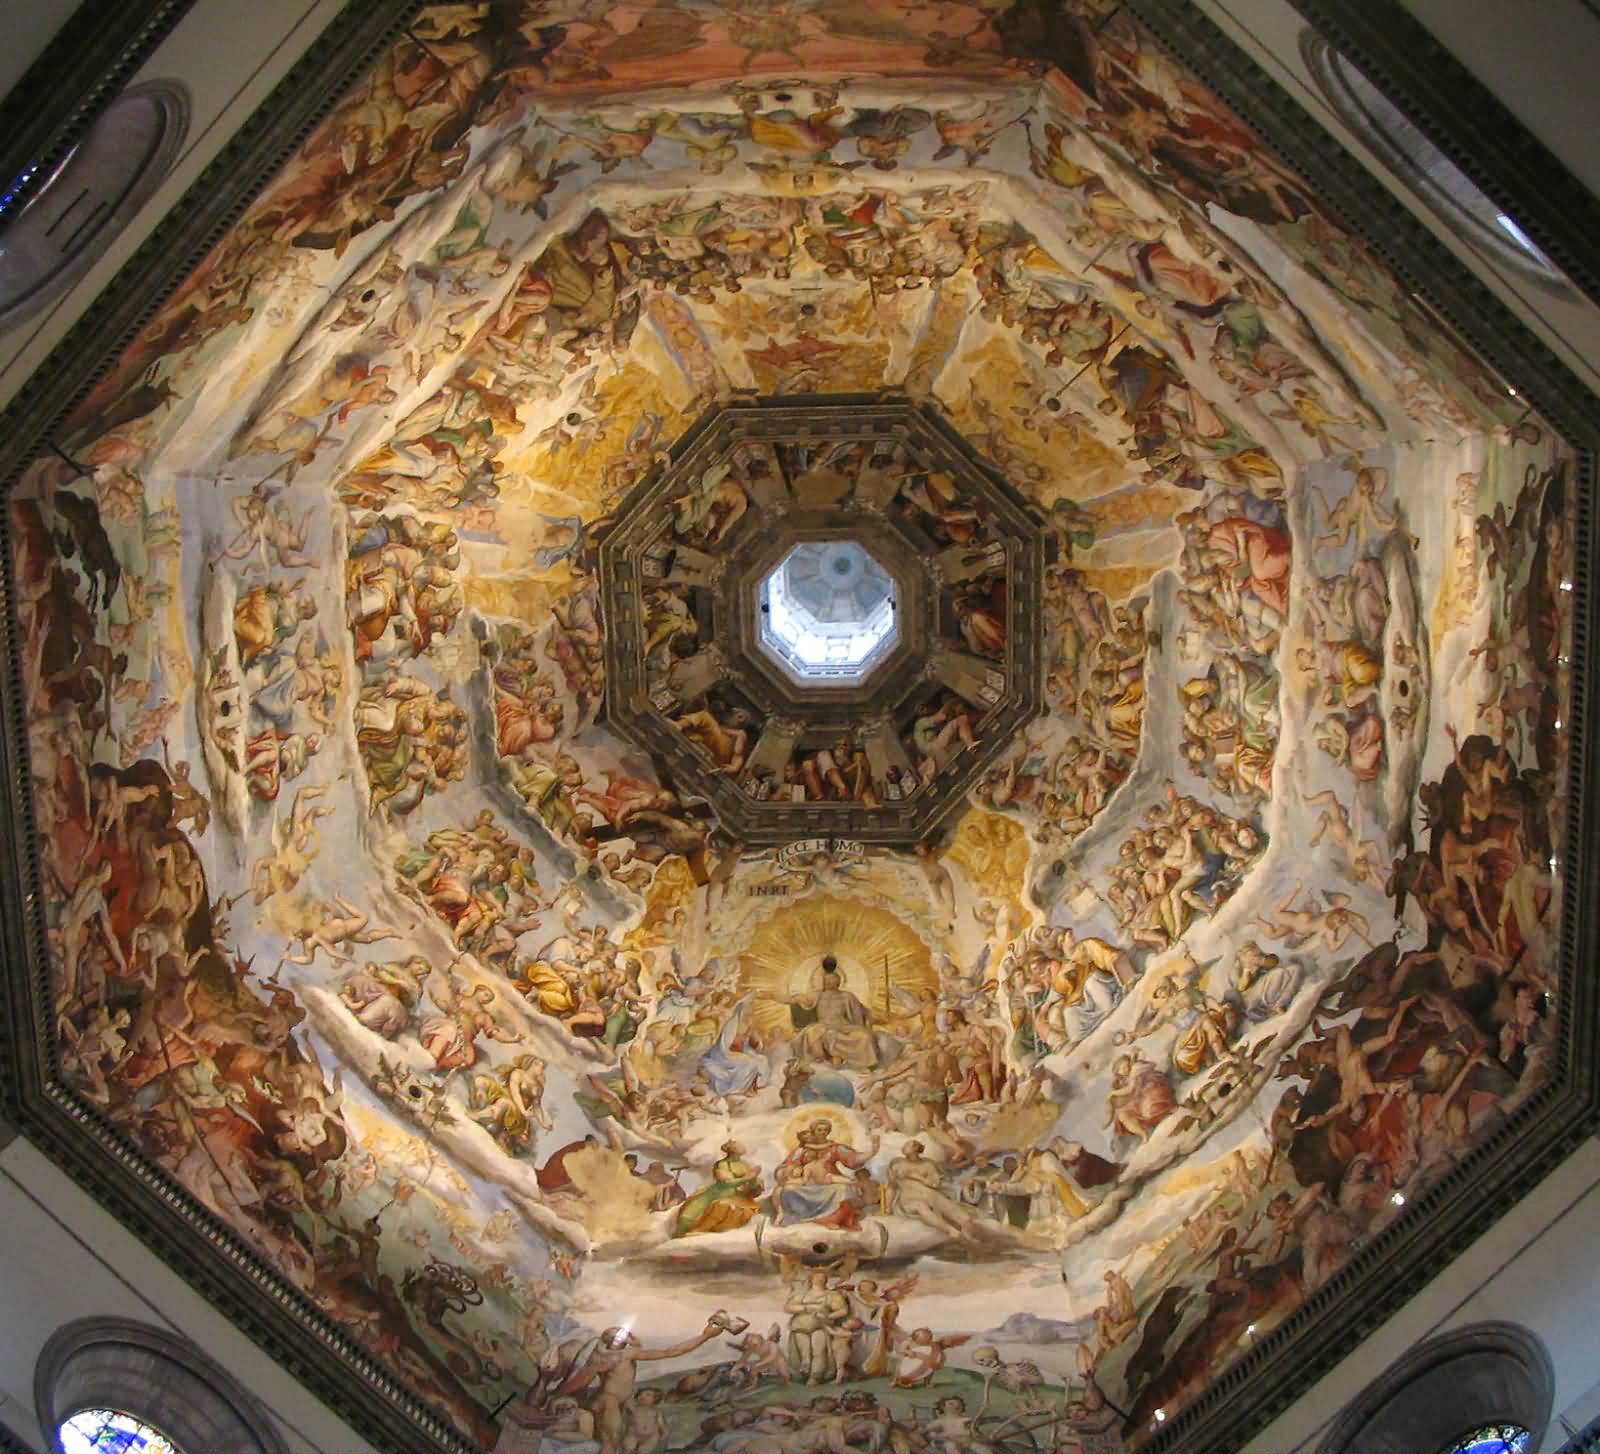 Adorable Paintings Inside The Dome Of The Florence Cathedral